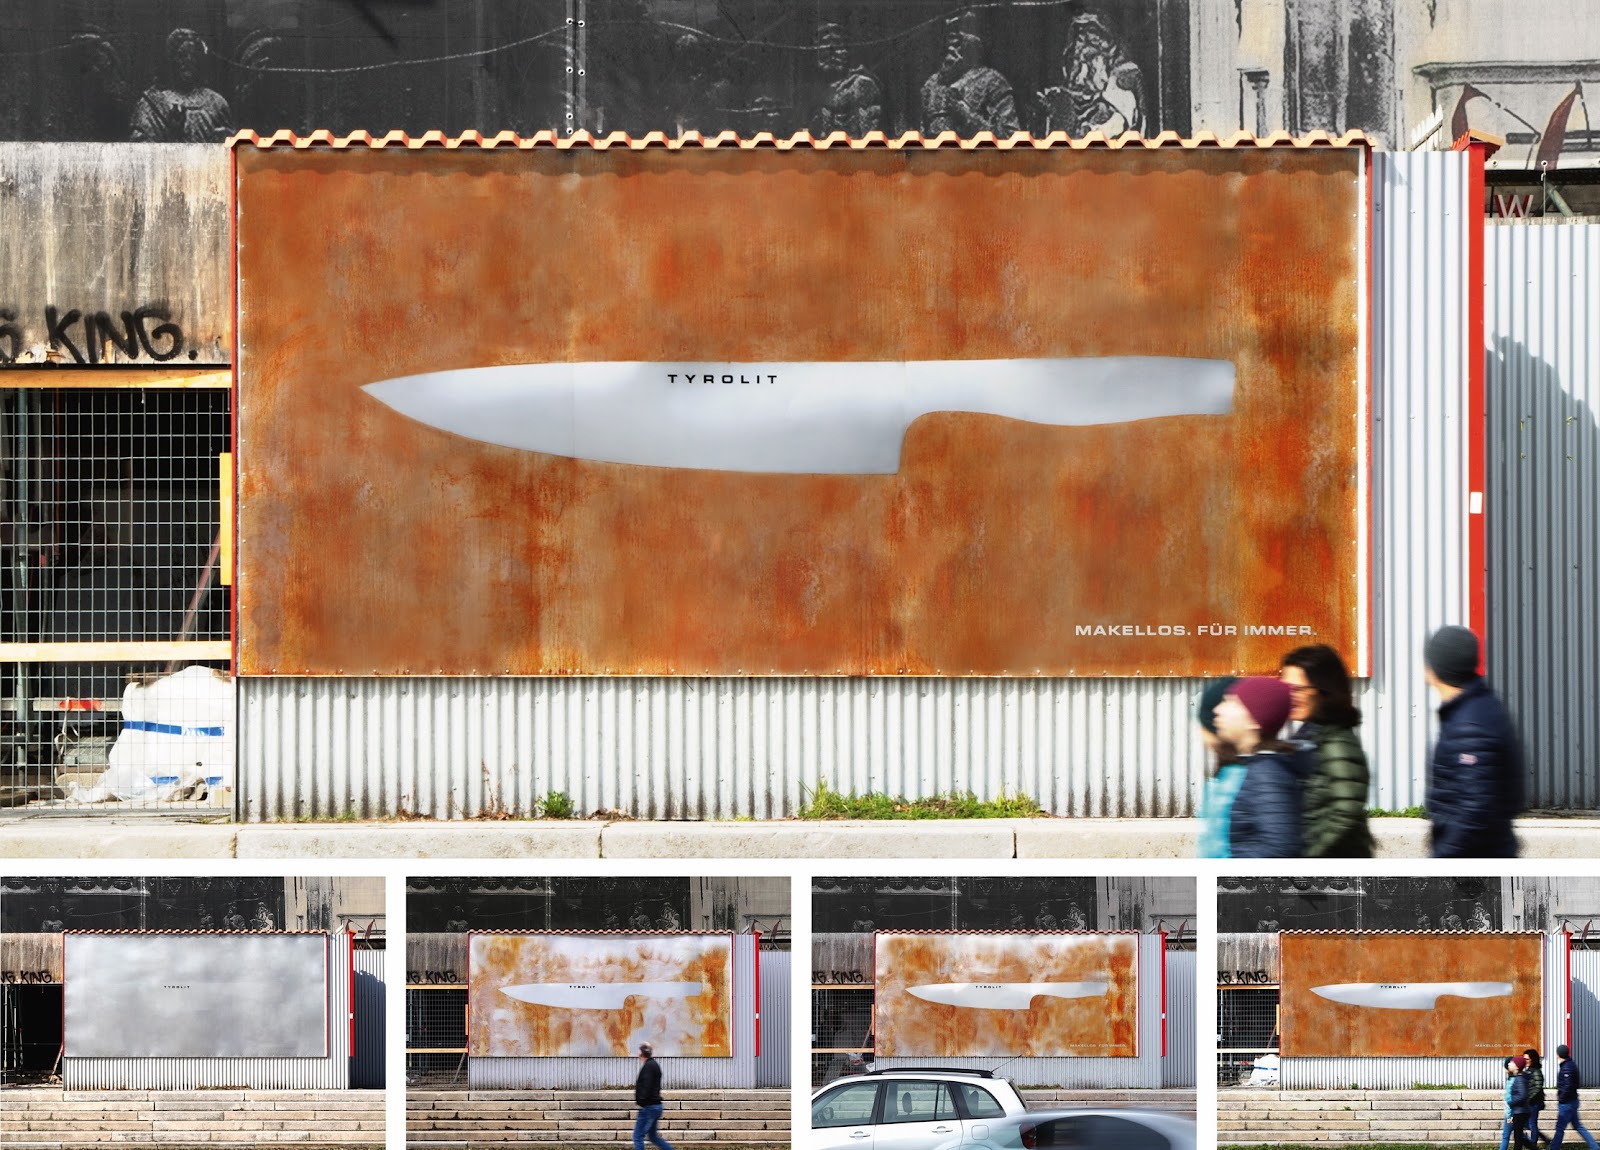 Tyrolit billboard ad campaign with shiny metallic knife in center and rust around the rest of the billboard.